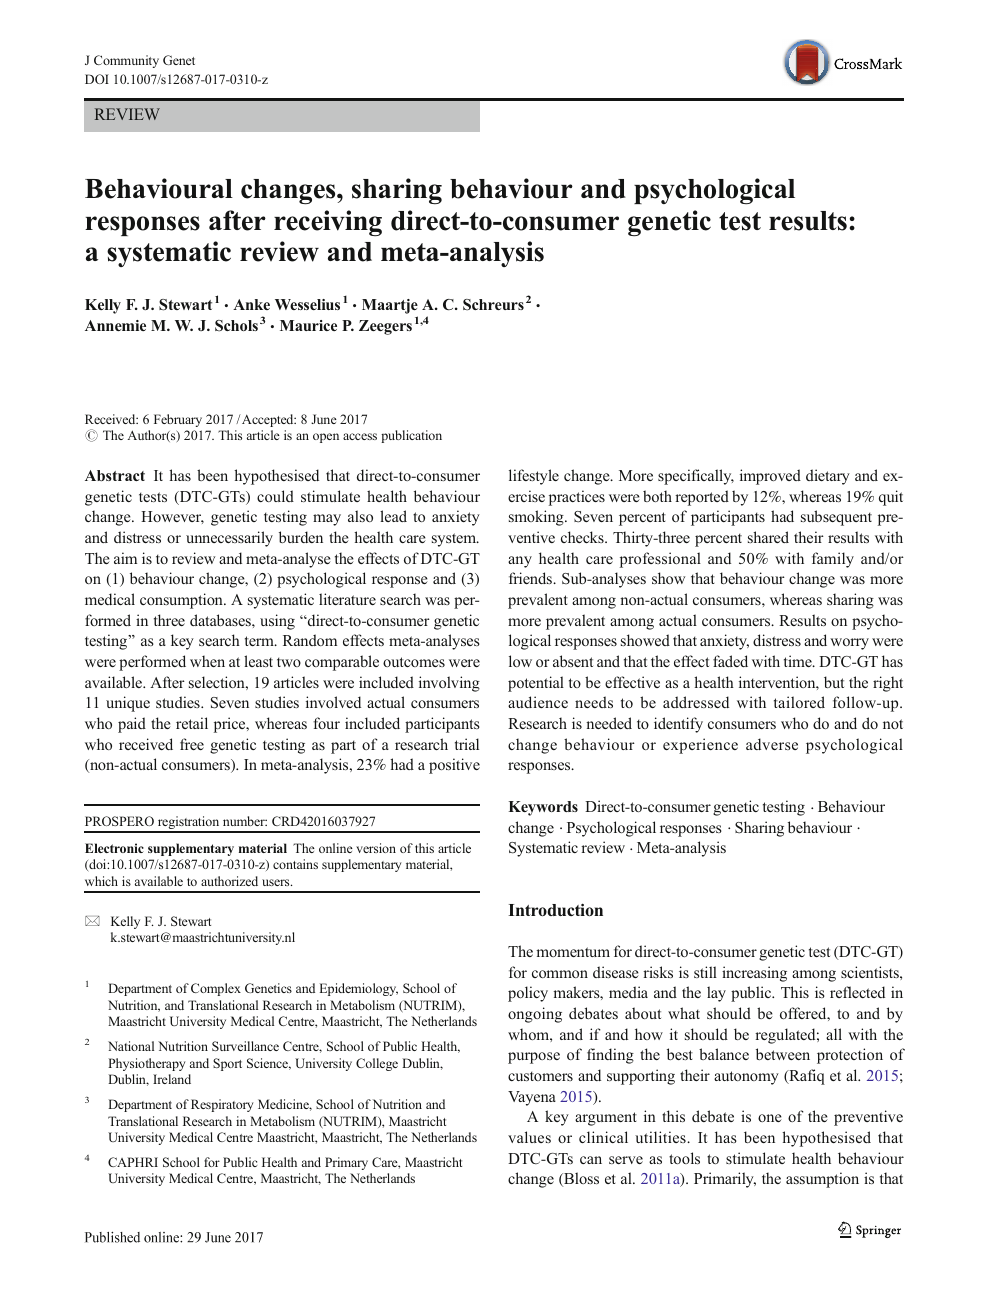 Behavioural Changes Sharing Behaviour And Psychological Responses After Receiving Direct To Consumer Genetic Test Results A Systematic Review And Meta Analysis Topic Of Research Paper In Health Sciences Download Scholarly Article Pdf And Read